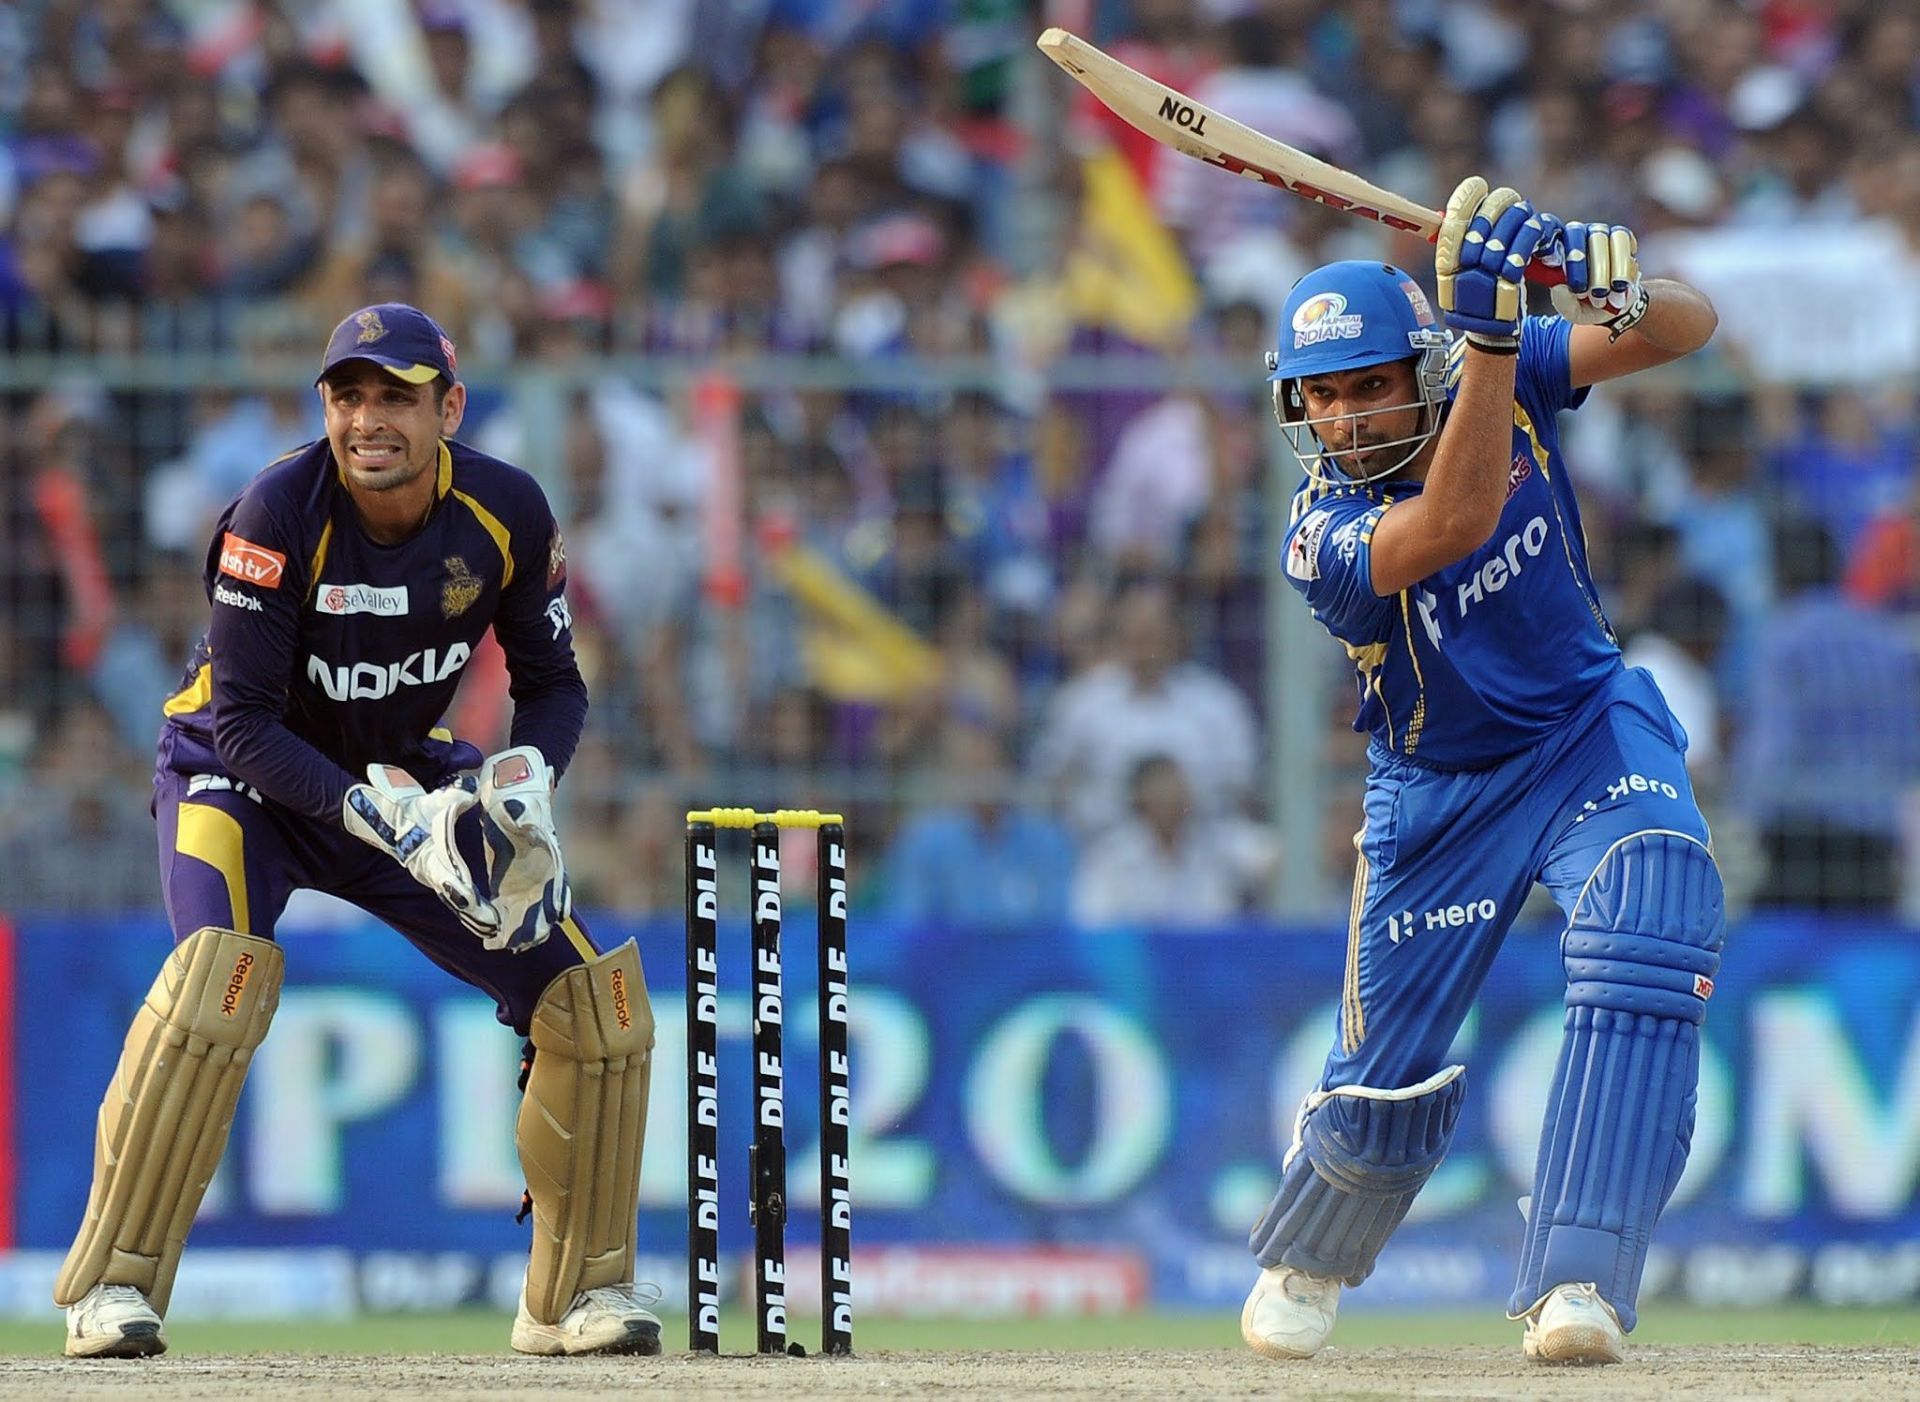 Rohit Sharma smashed a spectacular century at the Eden Gardens in 2012